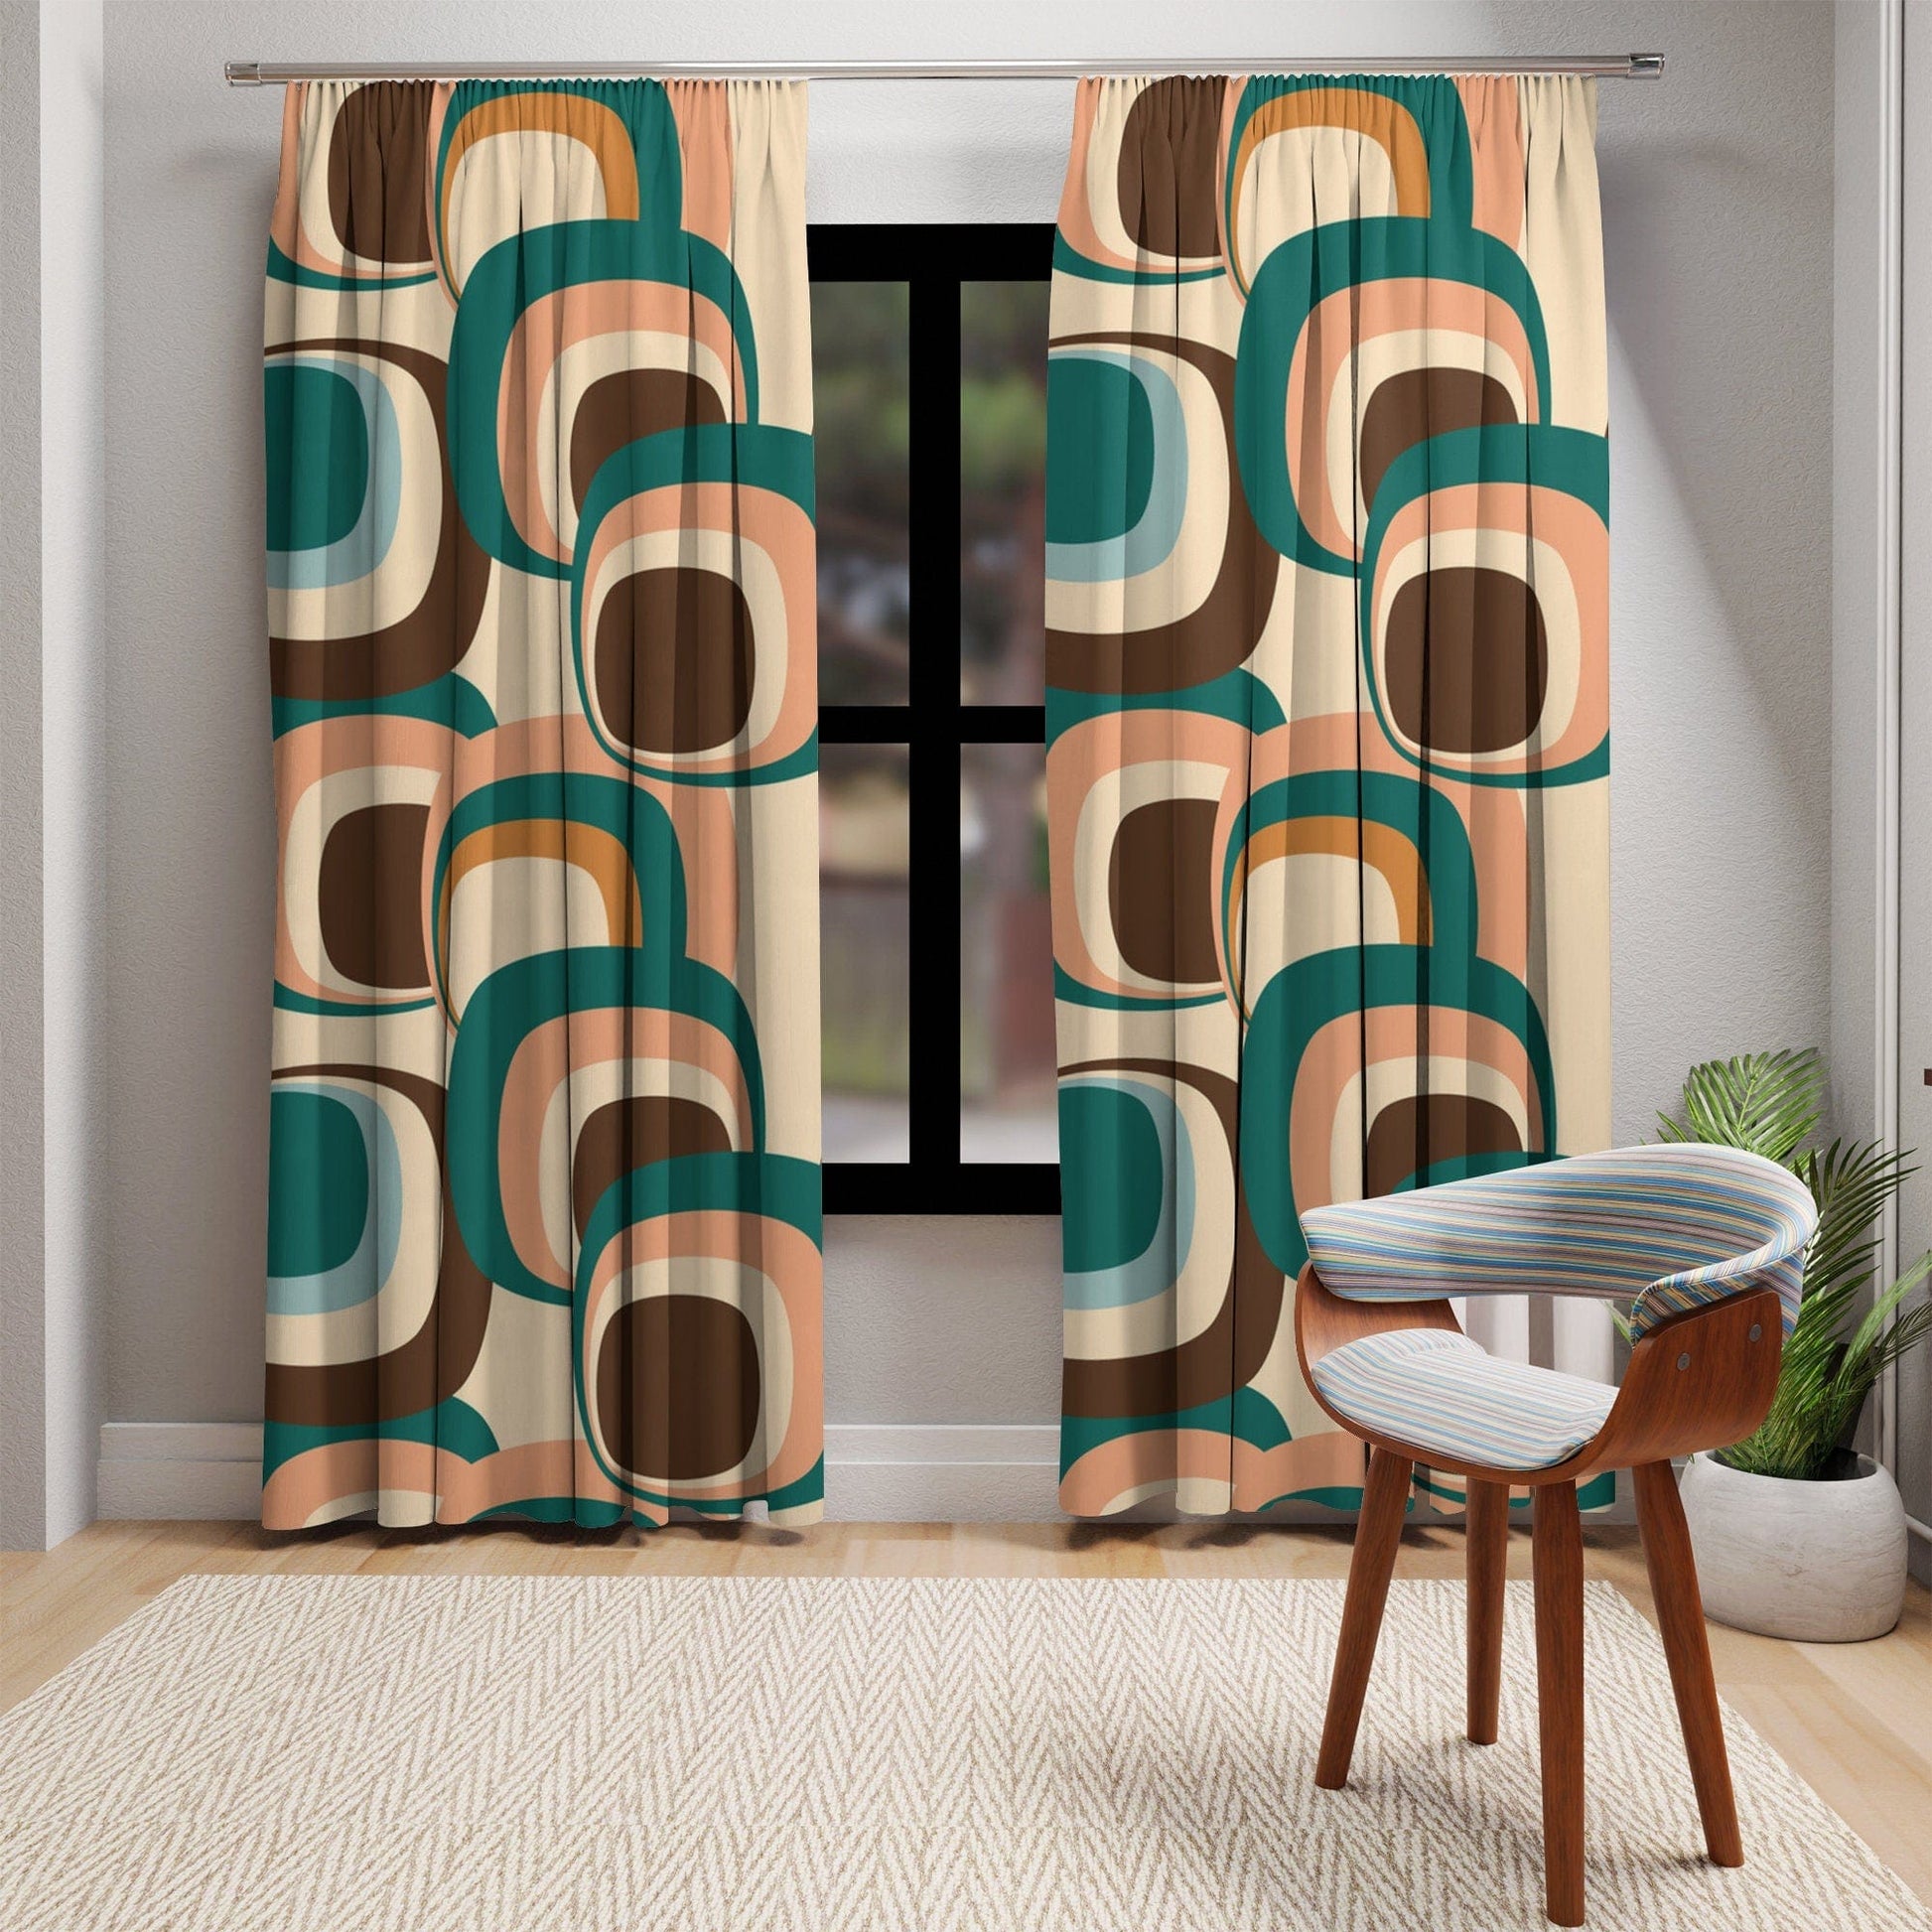 Kate McEnroe New York 60s, 70s Mid Century Modern Retro Geometric Window Curtains, Green, Blue, Brown, Beige MCM Curtain Panels, Living Room, Bedroom Drapes Gifts Window Curtains